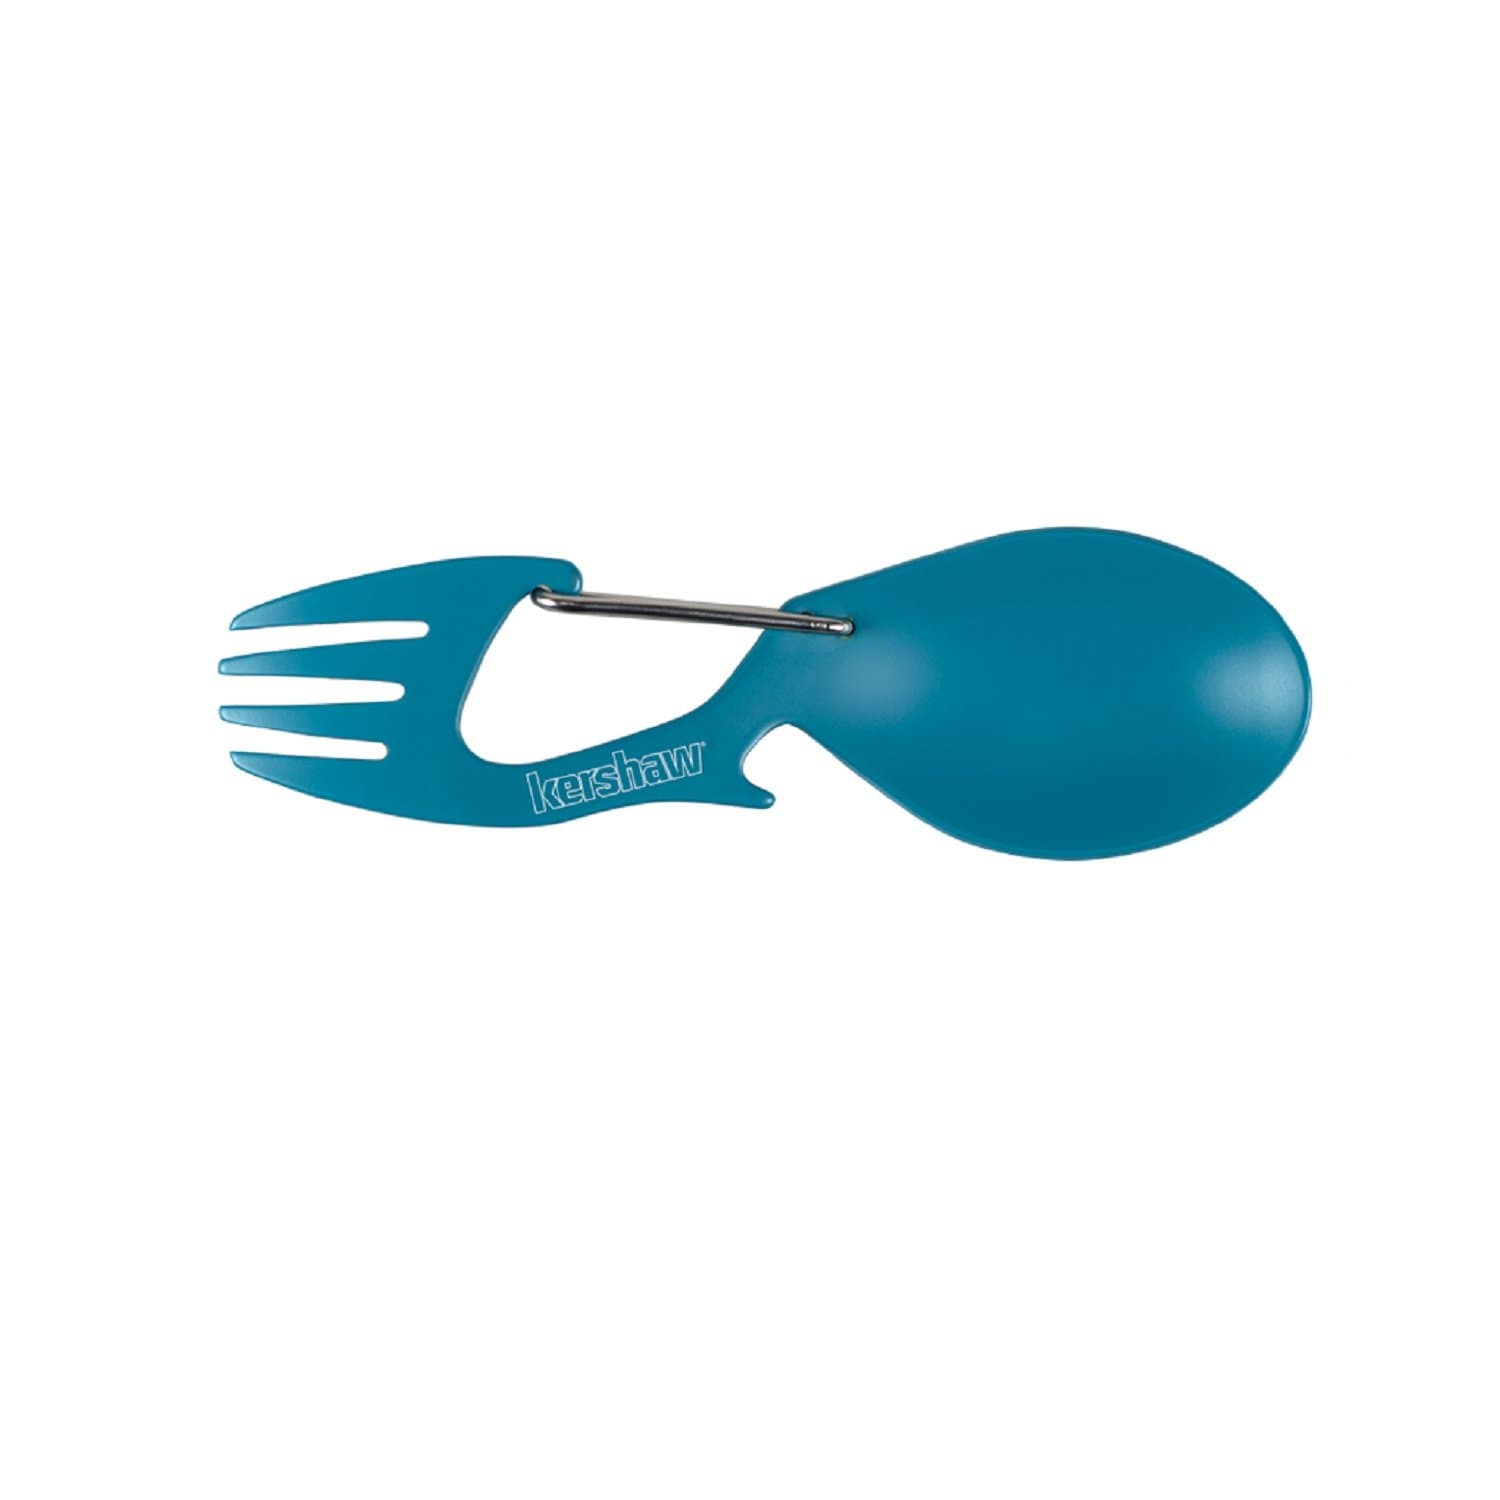 Kershaw Gifts & Novelty : Gifts Kershaw Ration Teal 4.60 in Overall Length